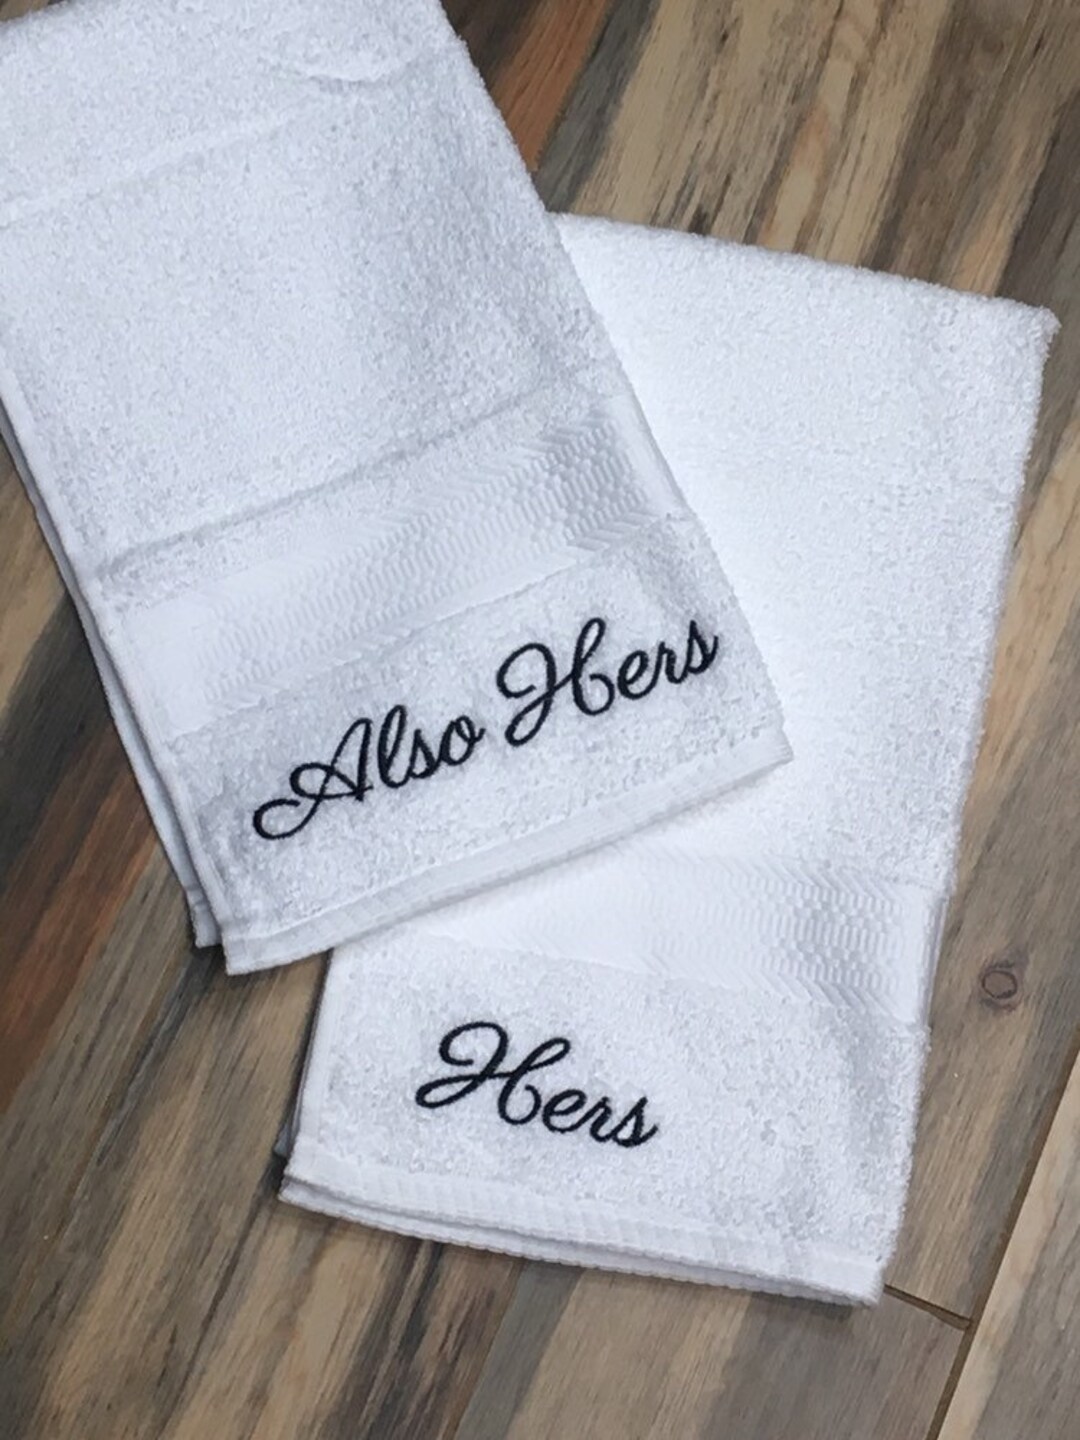 Custom Embroidered Towels Hers and Also Hers Housewarming - Etsy